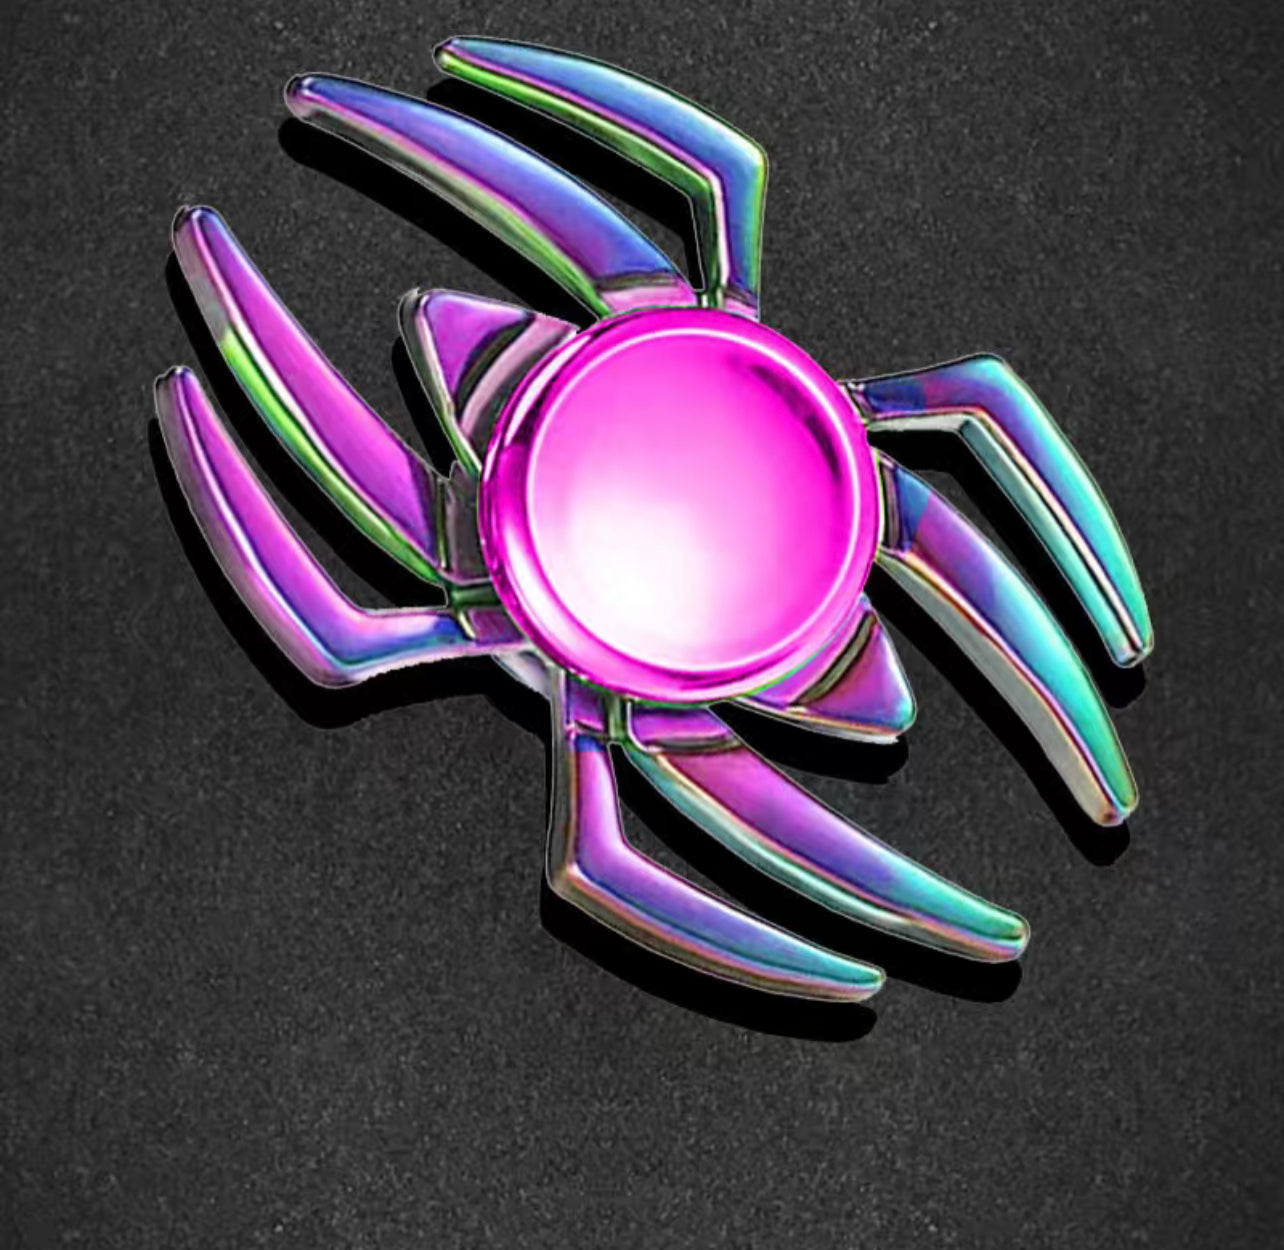 Colorful Fidget Spinners